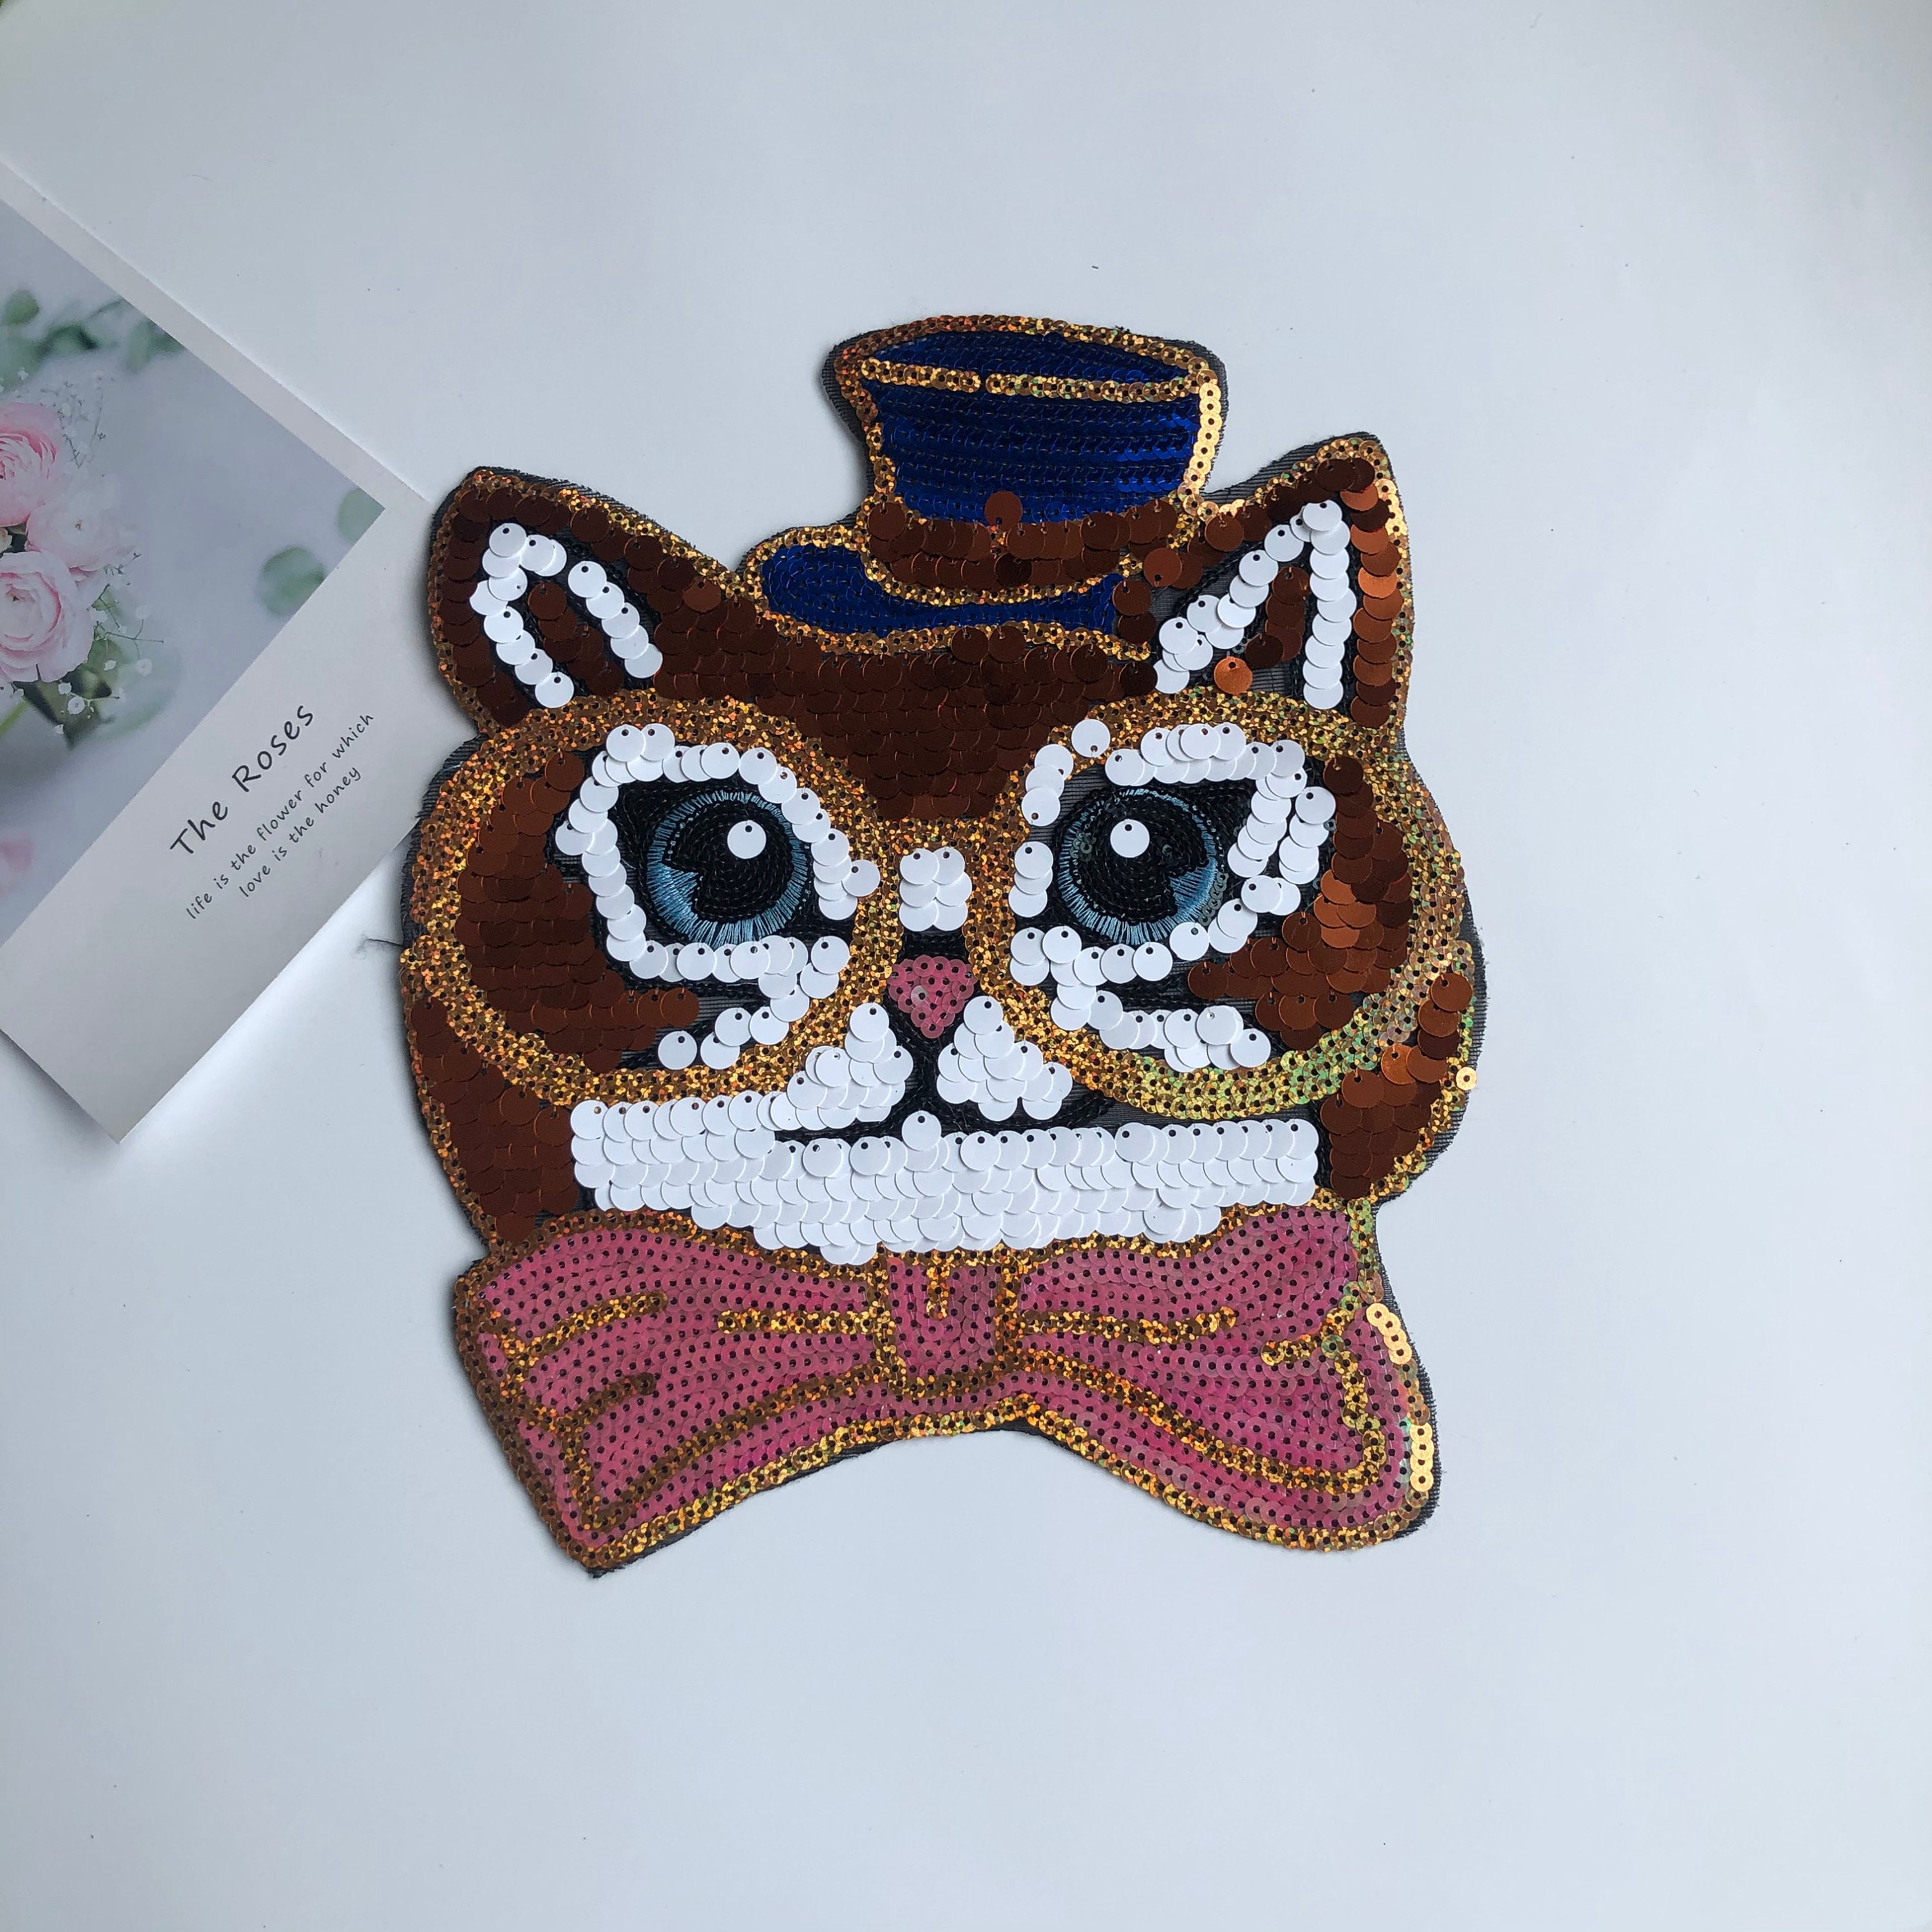 FEEPOP Cat Sequined Embroidered Sew on Patches for Clothes DIY Coat Sweater T Shirt Clothing Sequins Patch Applique